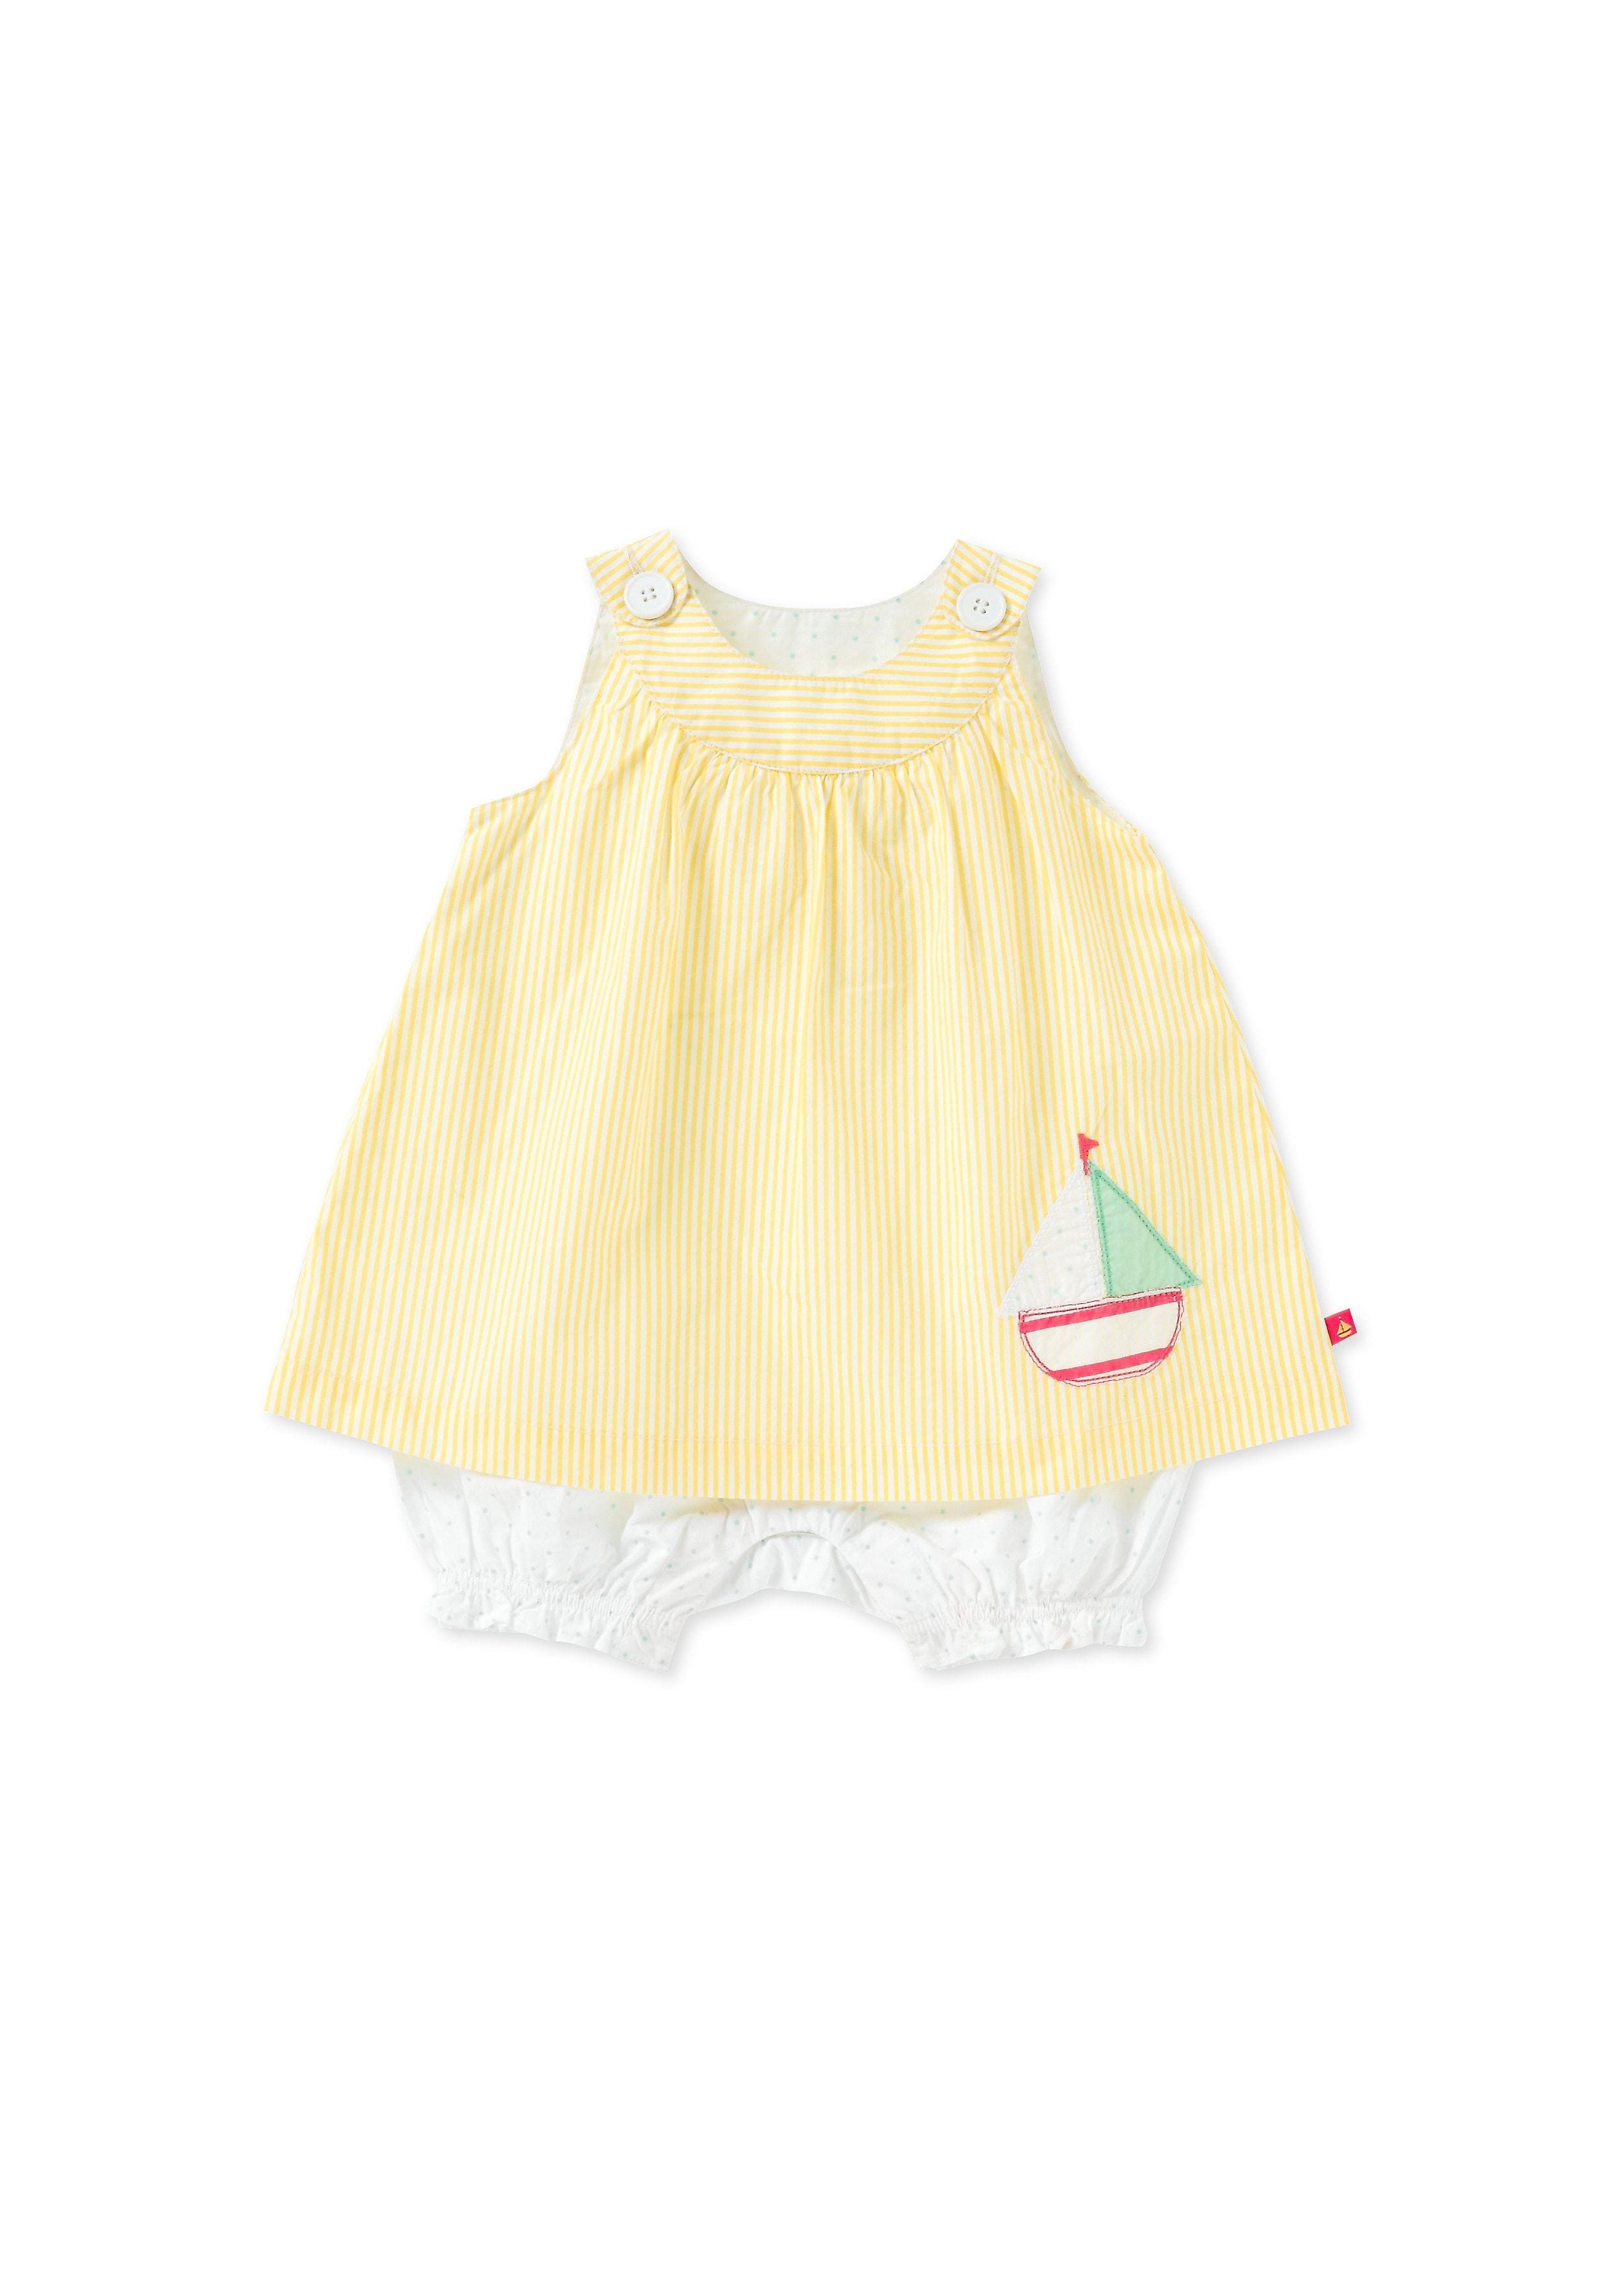 Mothercare | Girls Sleeveless Tops And Shorts Set Boat Patchwork - Yellow 0